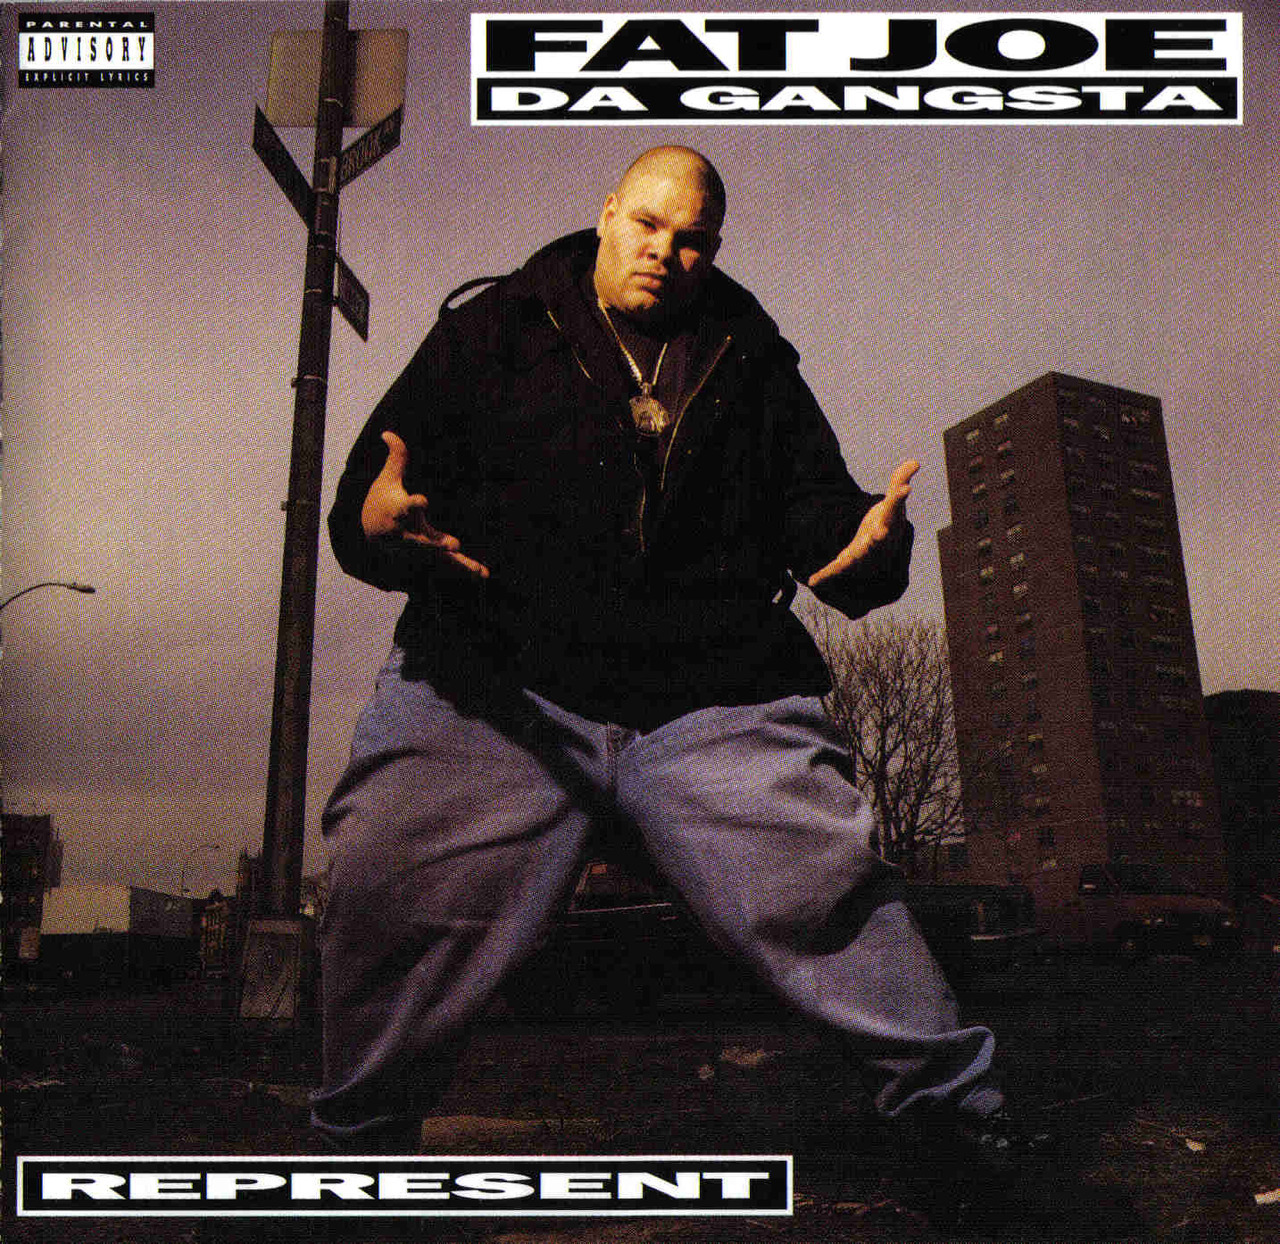 BACK IN THE DAY |7/27/93| Fat Joe released his debut album, Represent, on Relativity